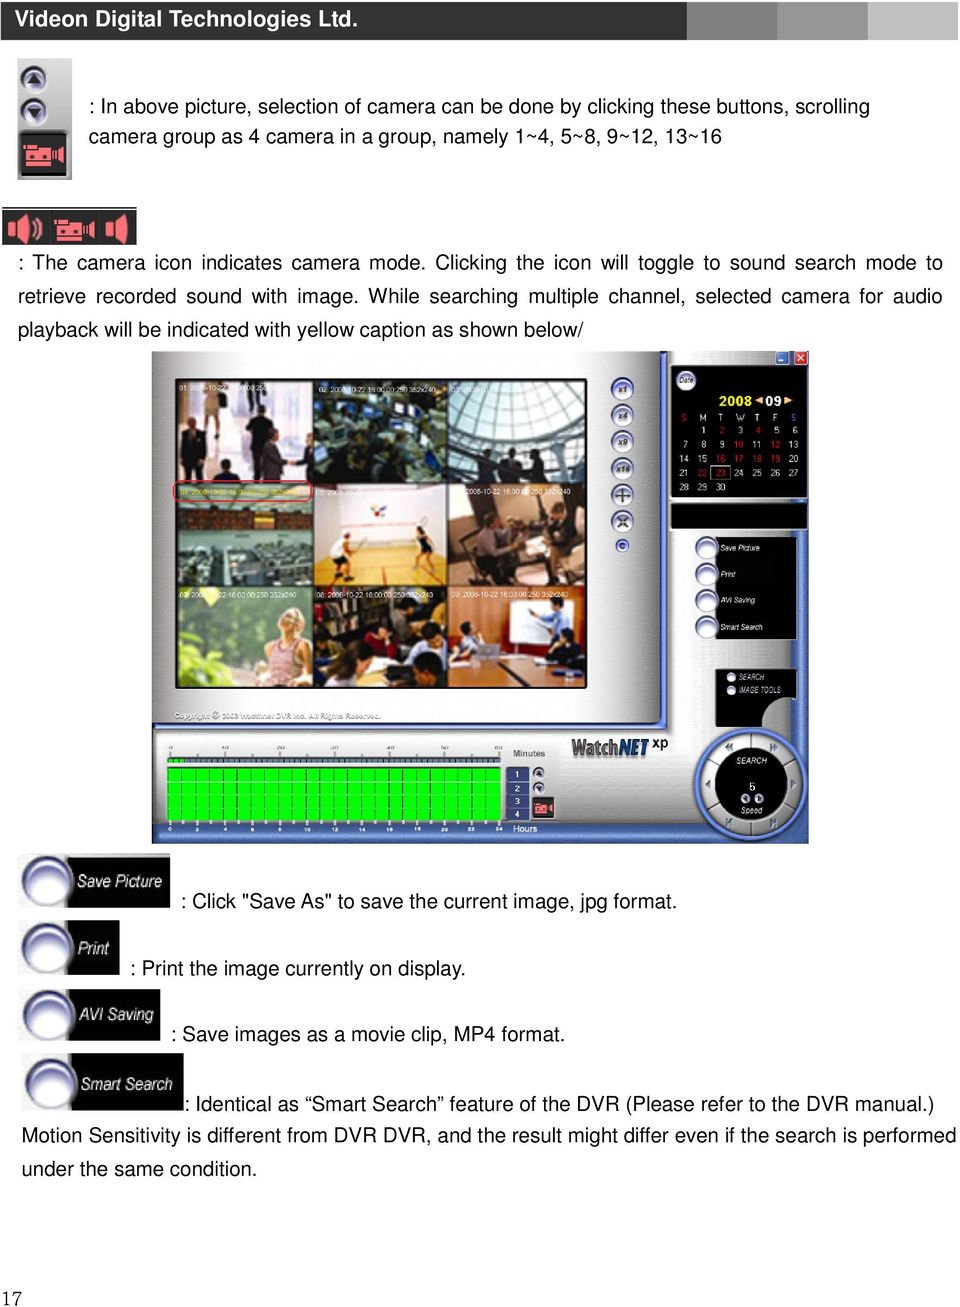 While searching multiple channel, selected camera for audio playback will be indicated with yellow caption as shown below/ : Click "Save As" to save the current image, jpg format.